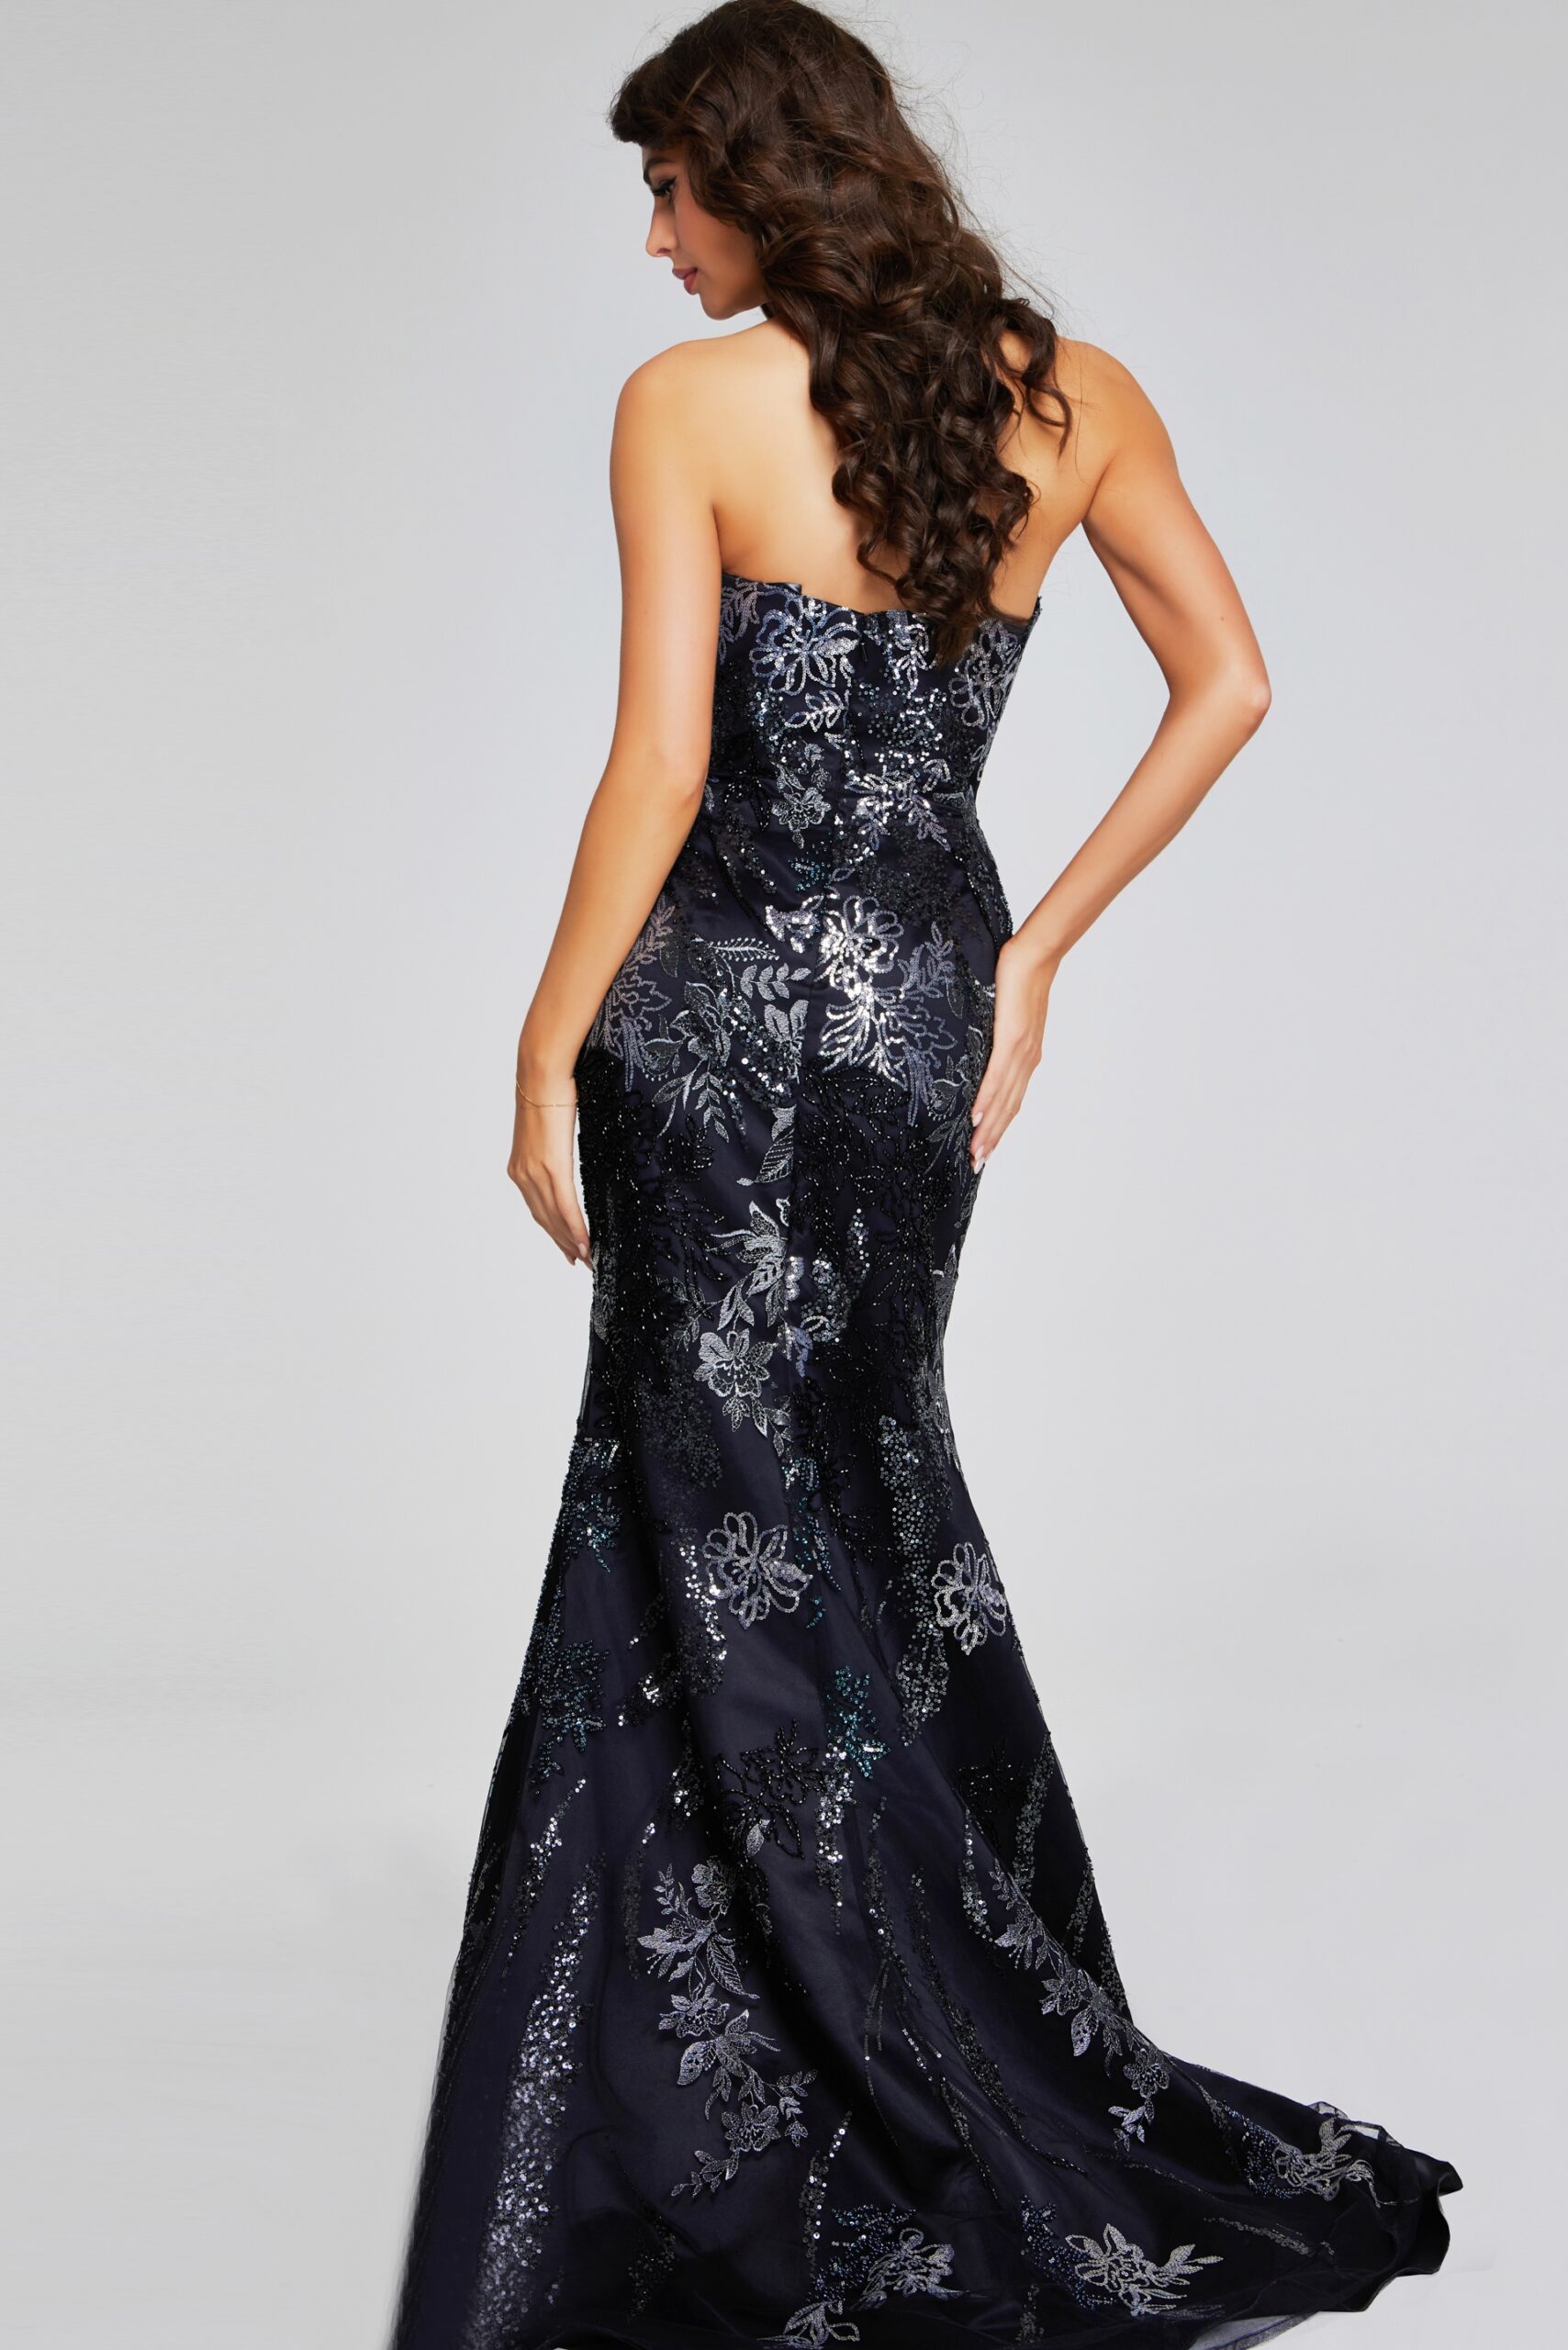 Glamorous Black Strapless Gown with Intricate Sequin Embellishments 40604